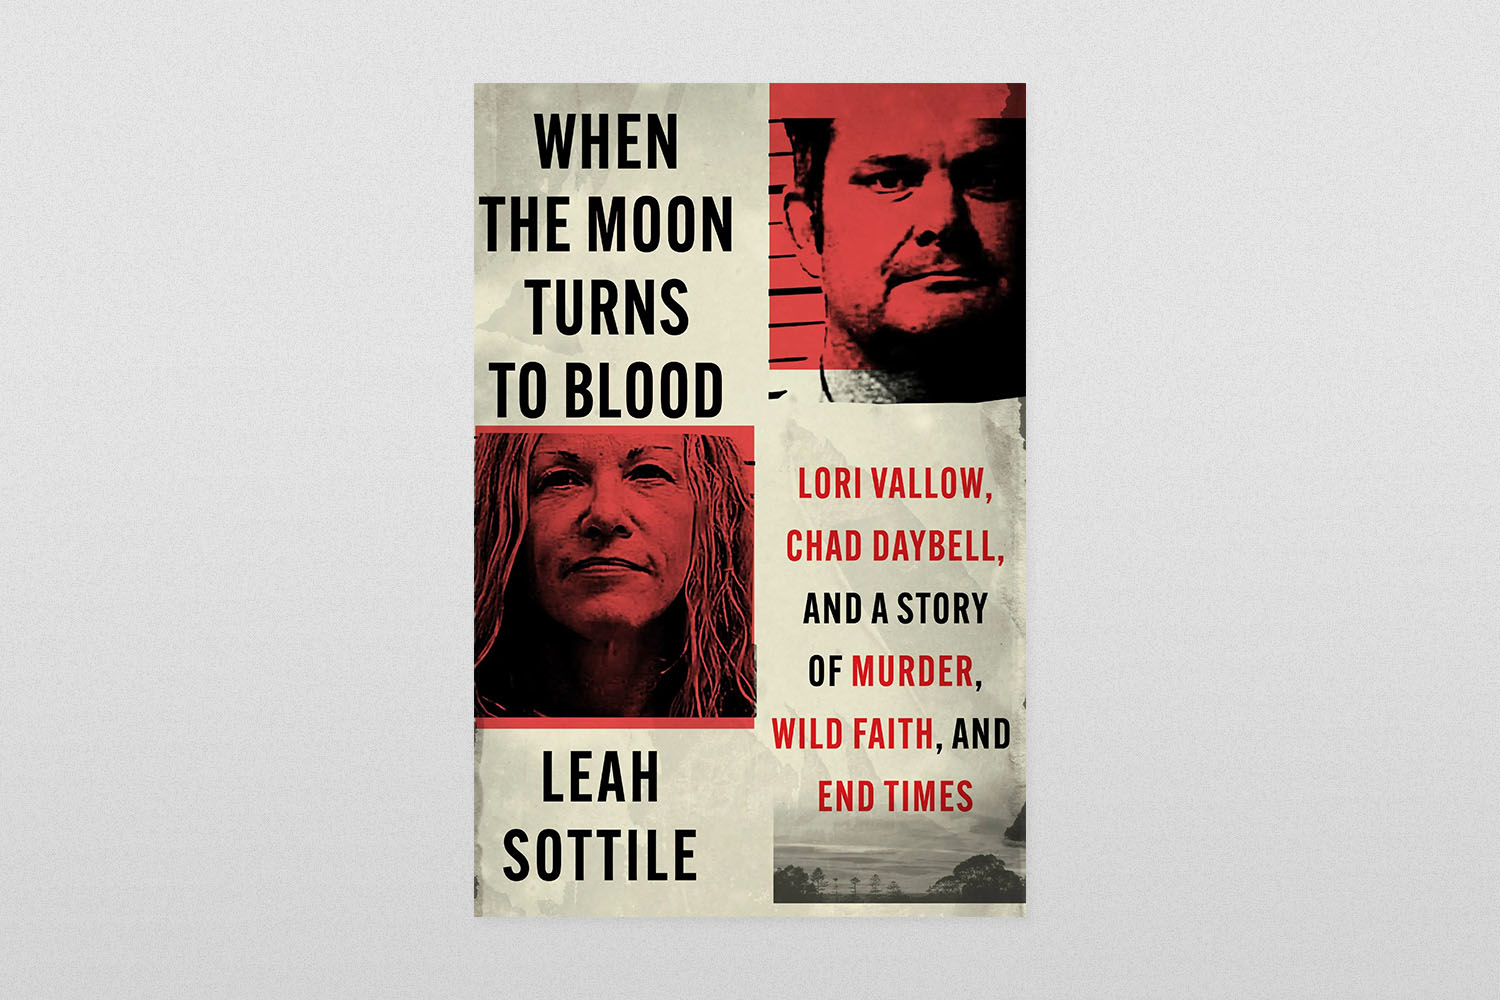 When the Moon Turns to Blood- Lori Vallow, Chad Daybell, and a Story of Murder, Wild Faith, and End Times by Leah Sottile